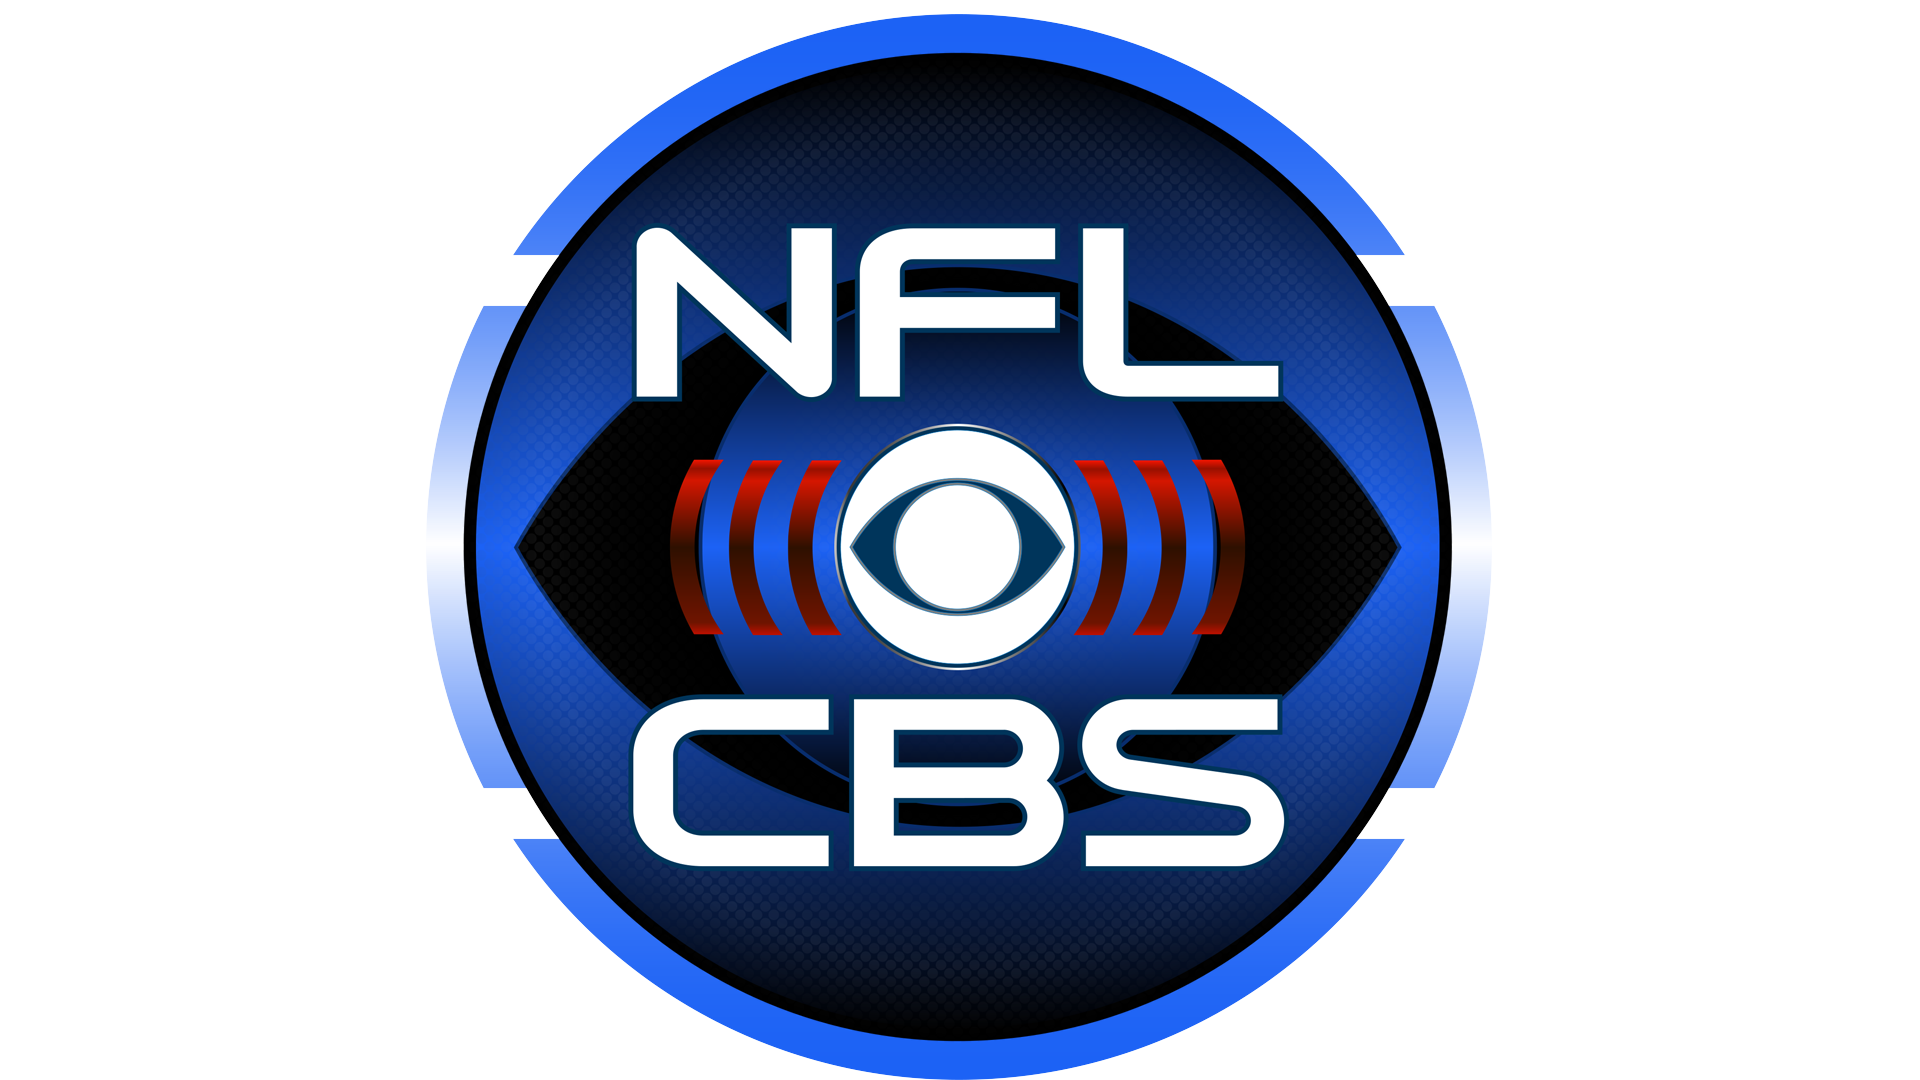 How To Watch Cbs Nfl Games On Roku Cheapest Shop, Save 40 jlcatj.gob.mx